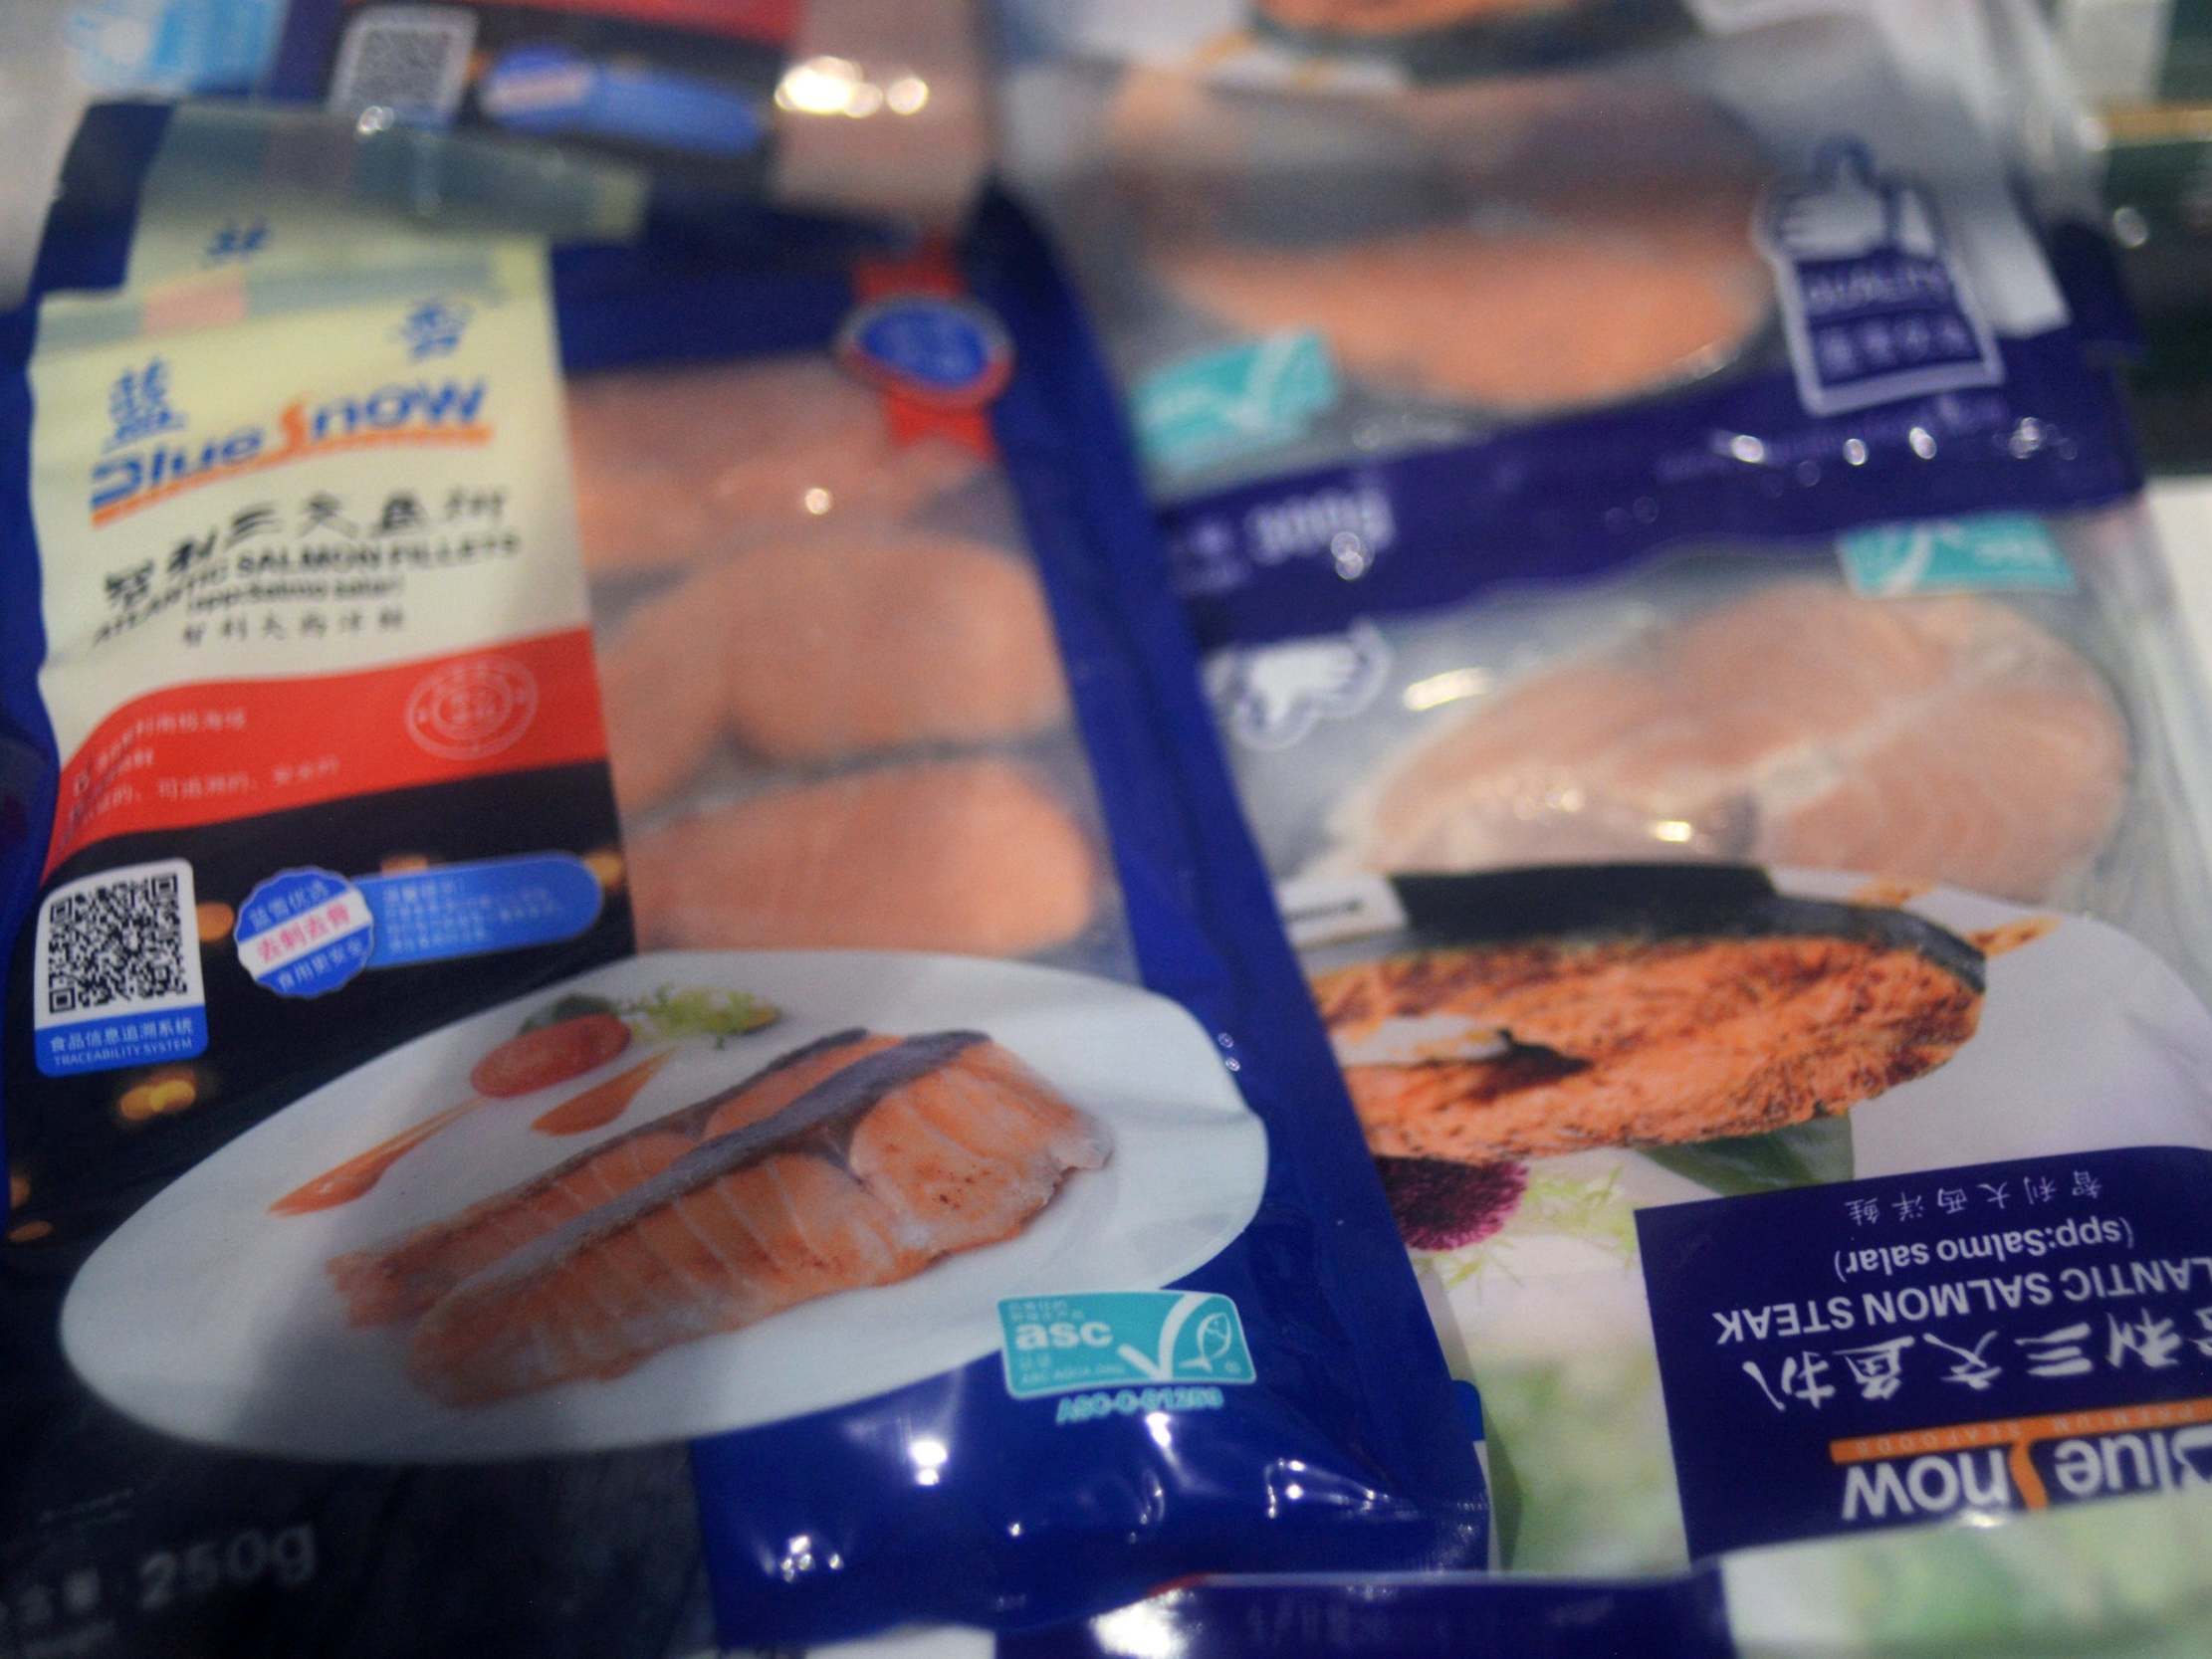 Frozen seafood products made from imported salmon are seen at a Carrefour supermarket, following new cases of coronavirus disease (COVID-19) infections